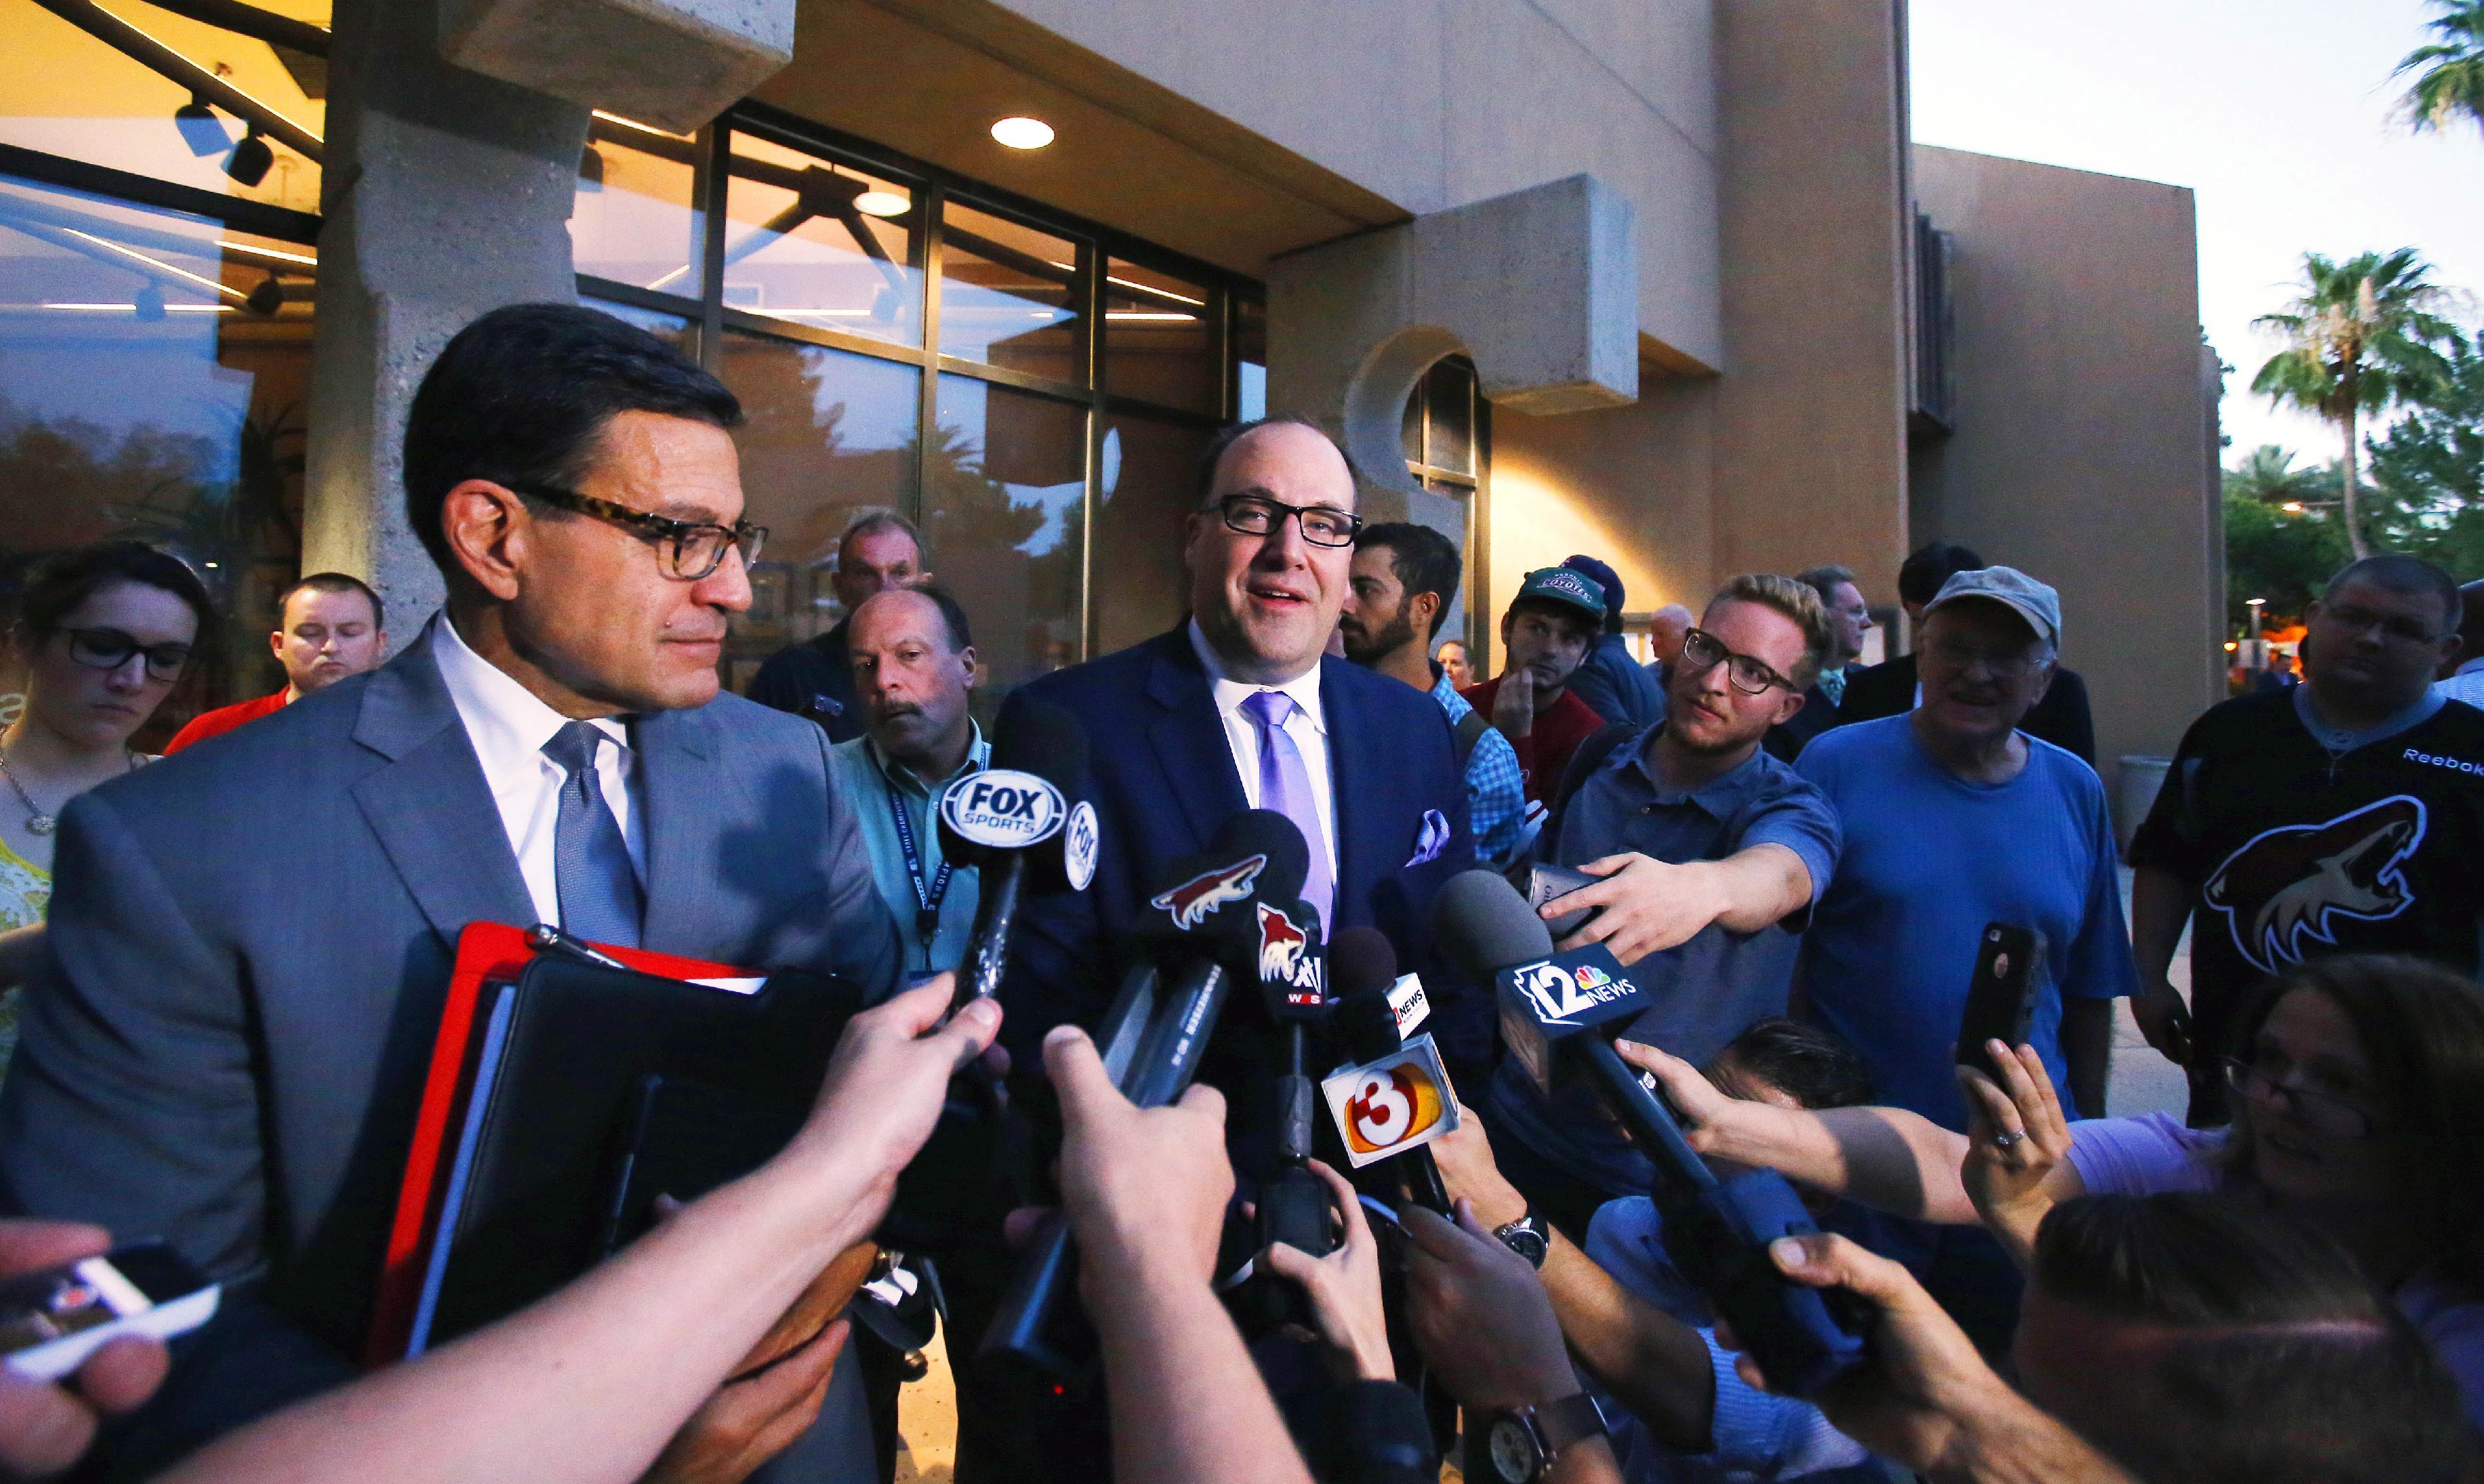 In this photo taken Wednesday, June 10, 2015, Arizona Coyotes attorney Nicholas Wood, left and team president Anthony LeBlanc, center, speak of legal action against the city of Glendale, Ariz. as they speak with the media after the city council voted to back out of an arena leasae agreement with the NHL team during a special council meeting. (David Kadlubowski/The Arizona Republic via AP) MARICOPA COUNTY OUT; MAGS OUT; NO SALES; MANDATORY CREDIT